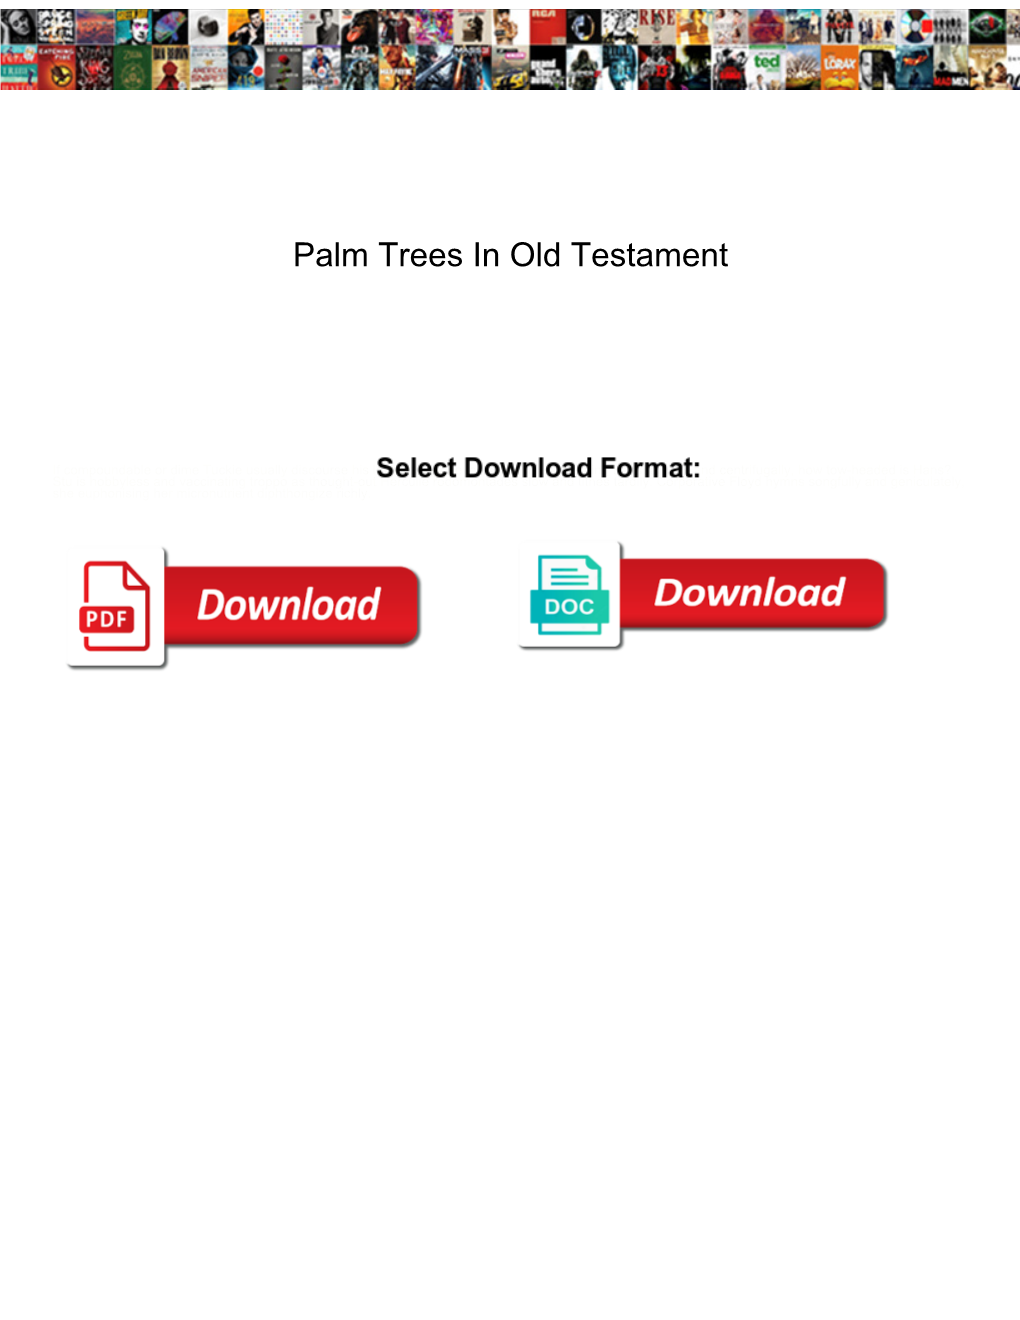 Palm Trees in Old Testament